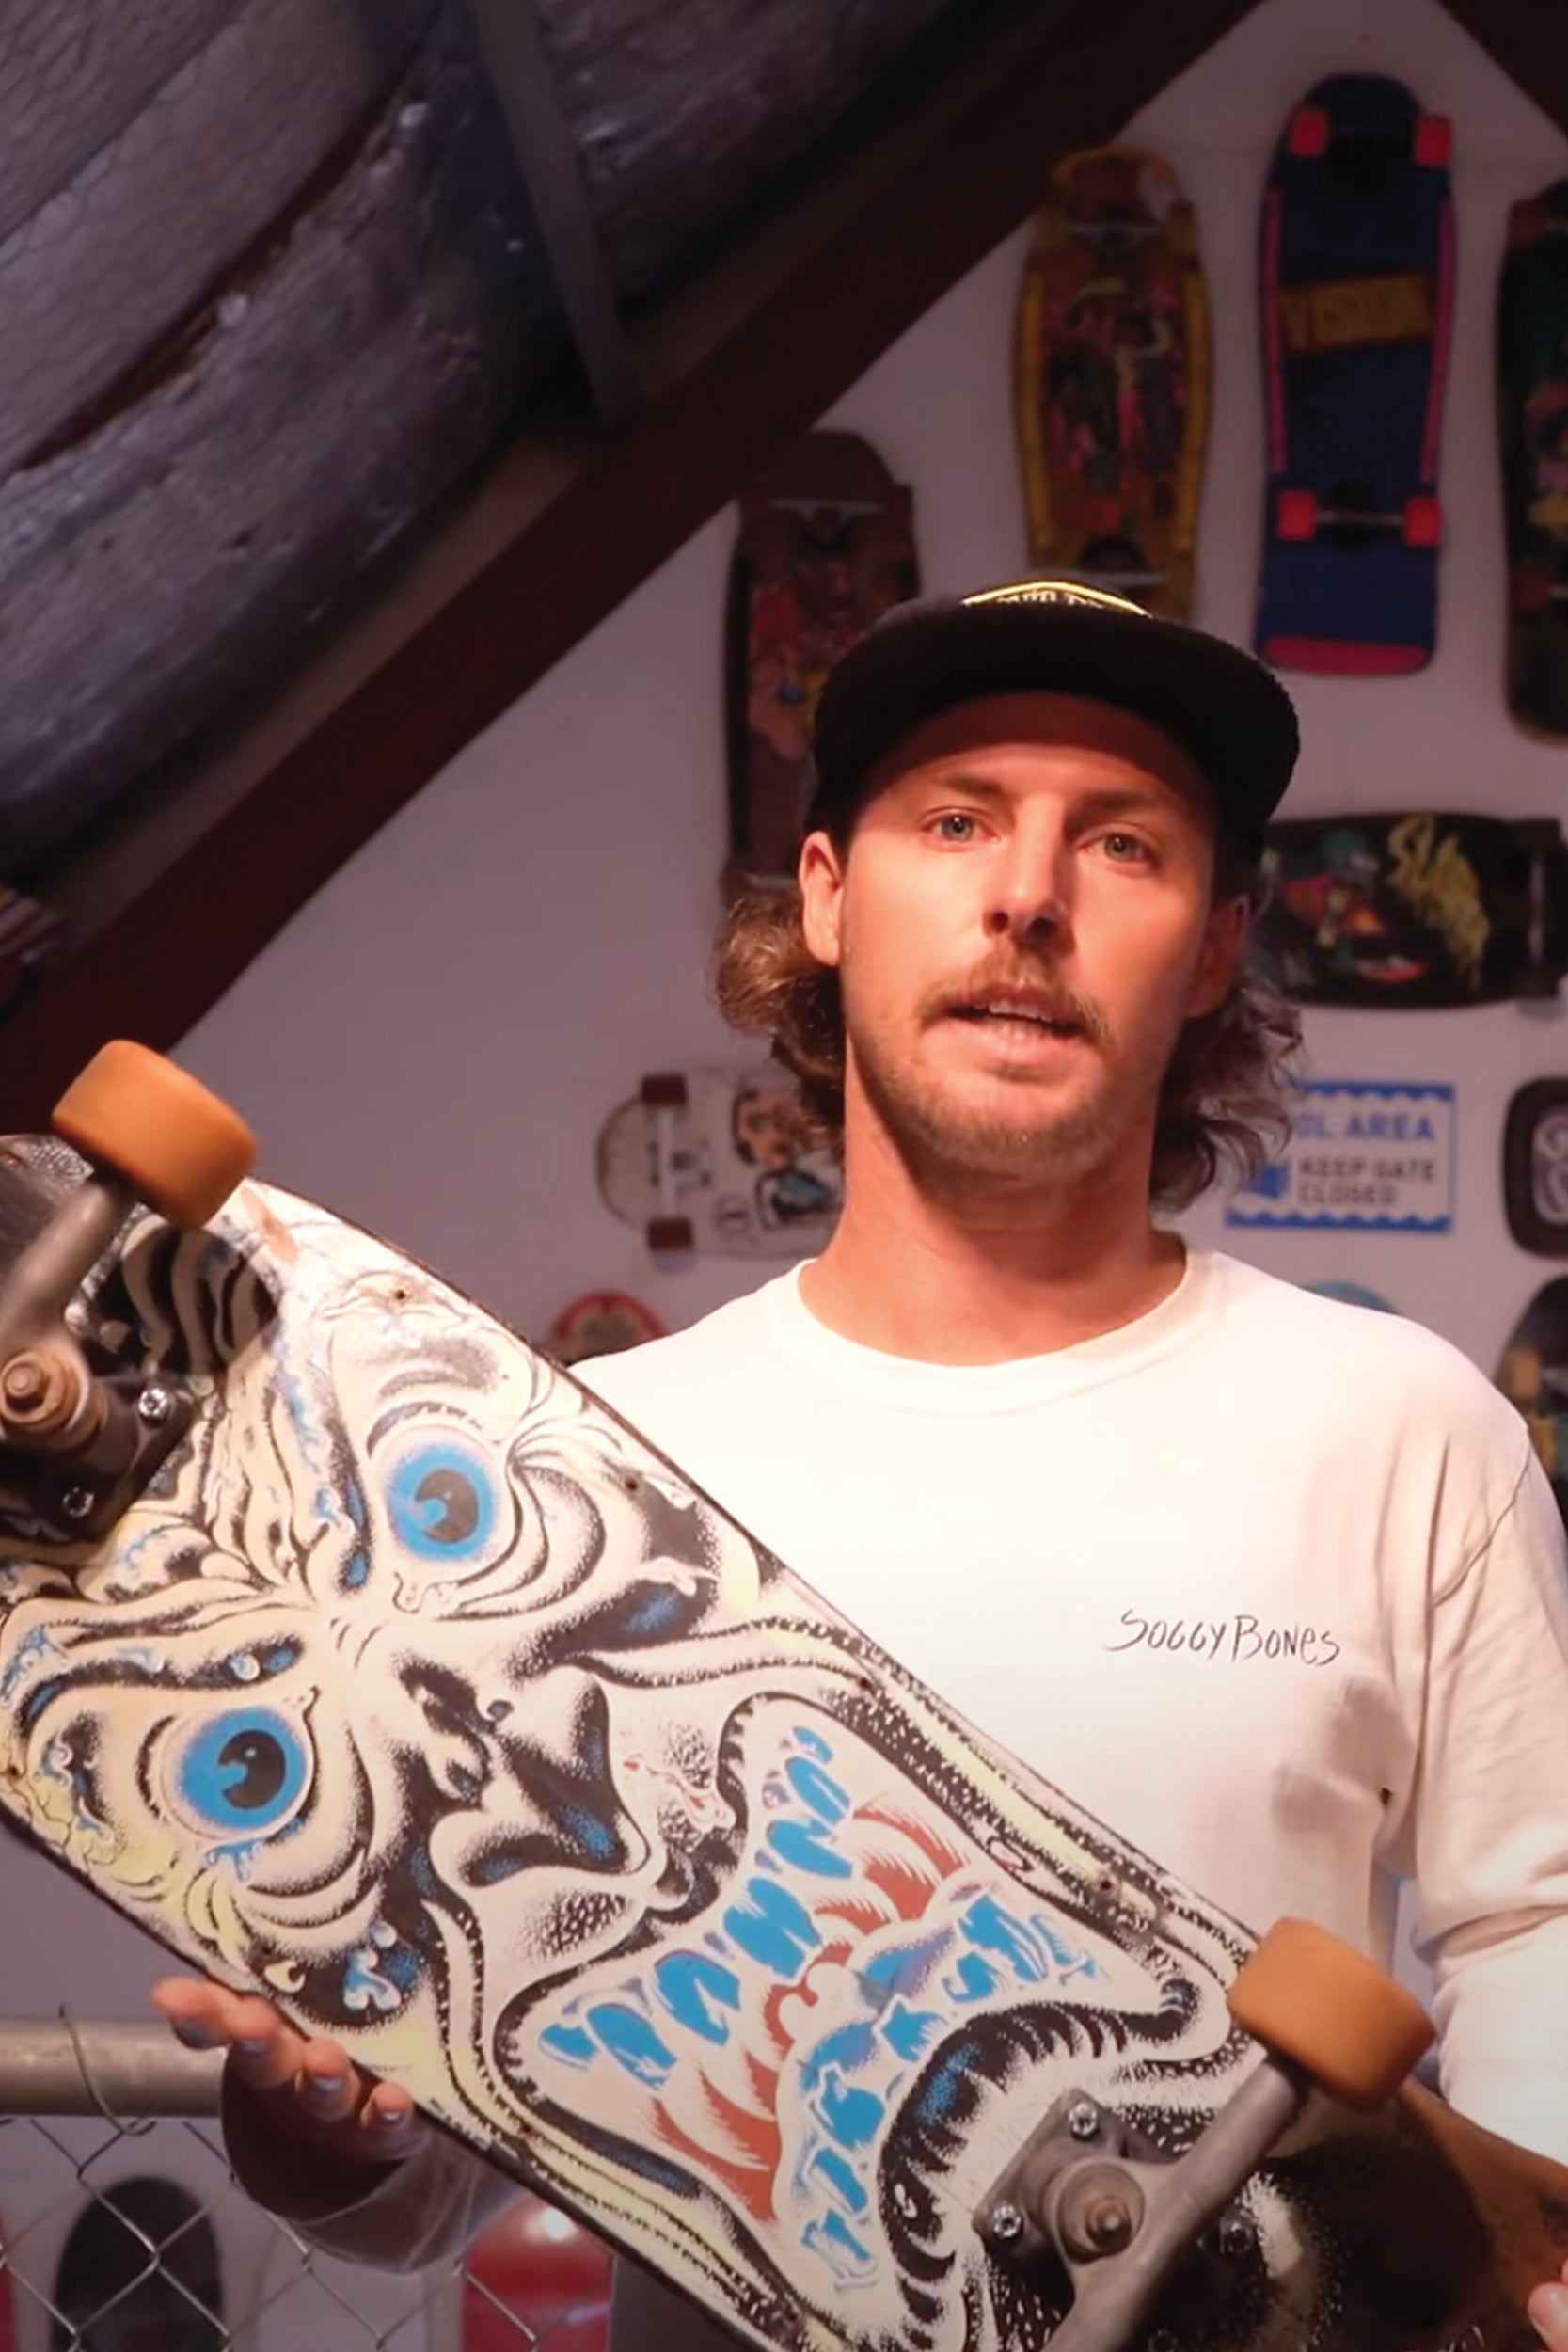 WATCH EPISODES OF BECAUSE THERE'S SKATEBOARDING